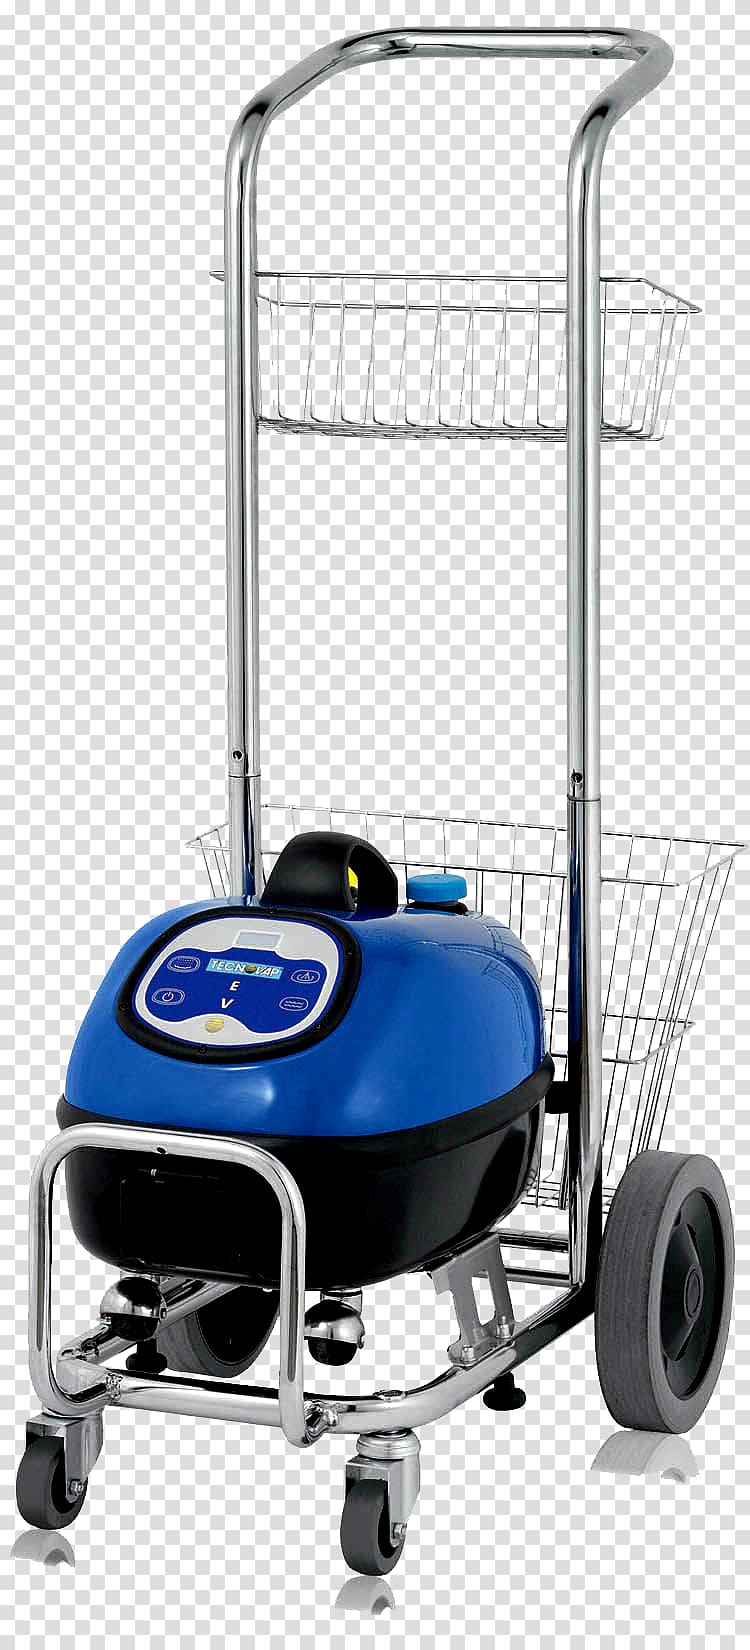 Vapor steam cleaner Pressure Washers Vacuum cleaner, others transparent background PNG clipart